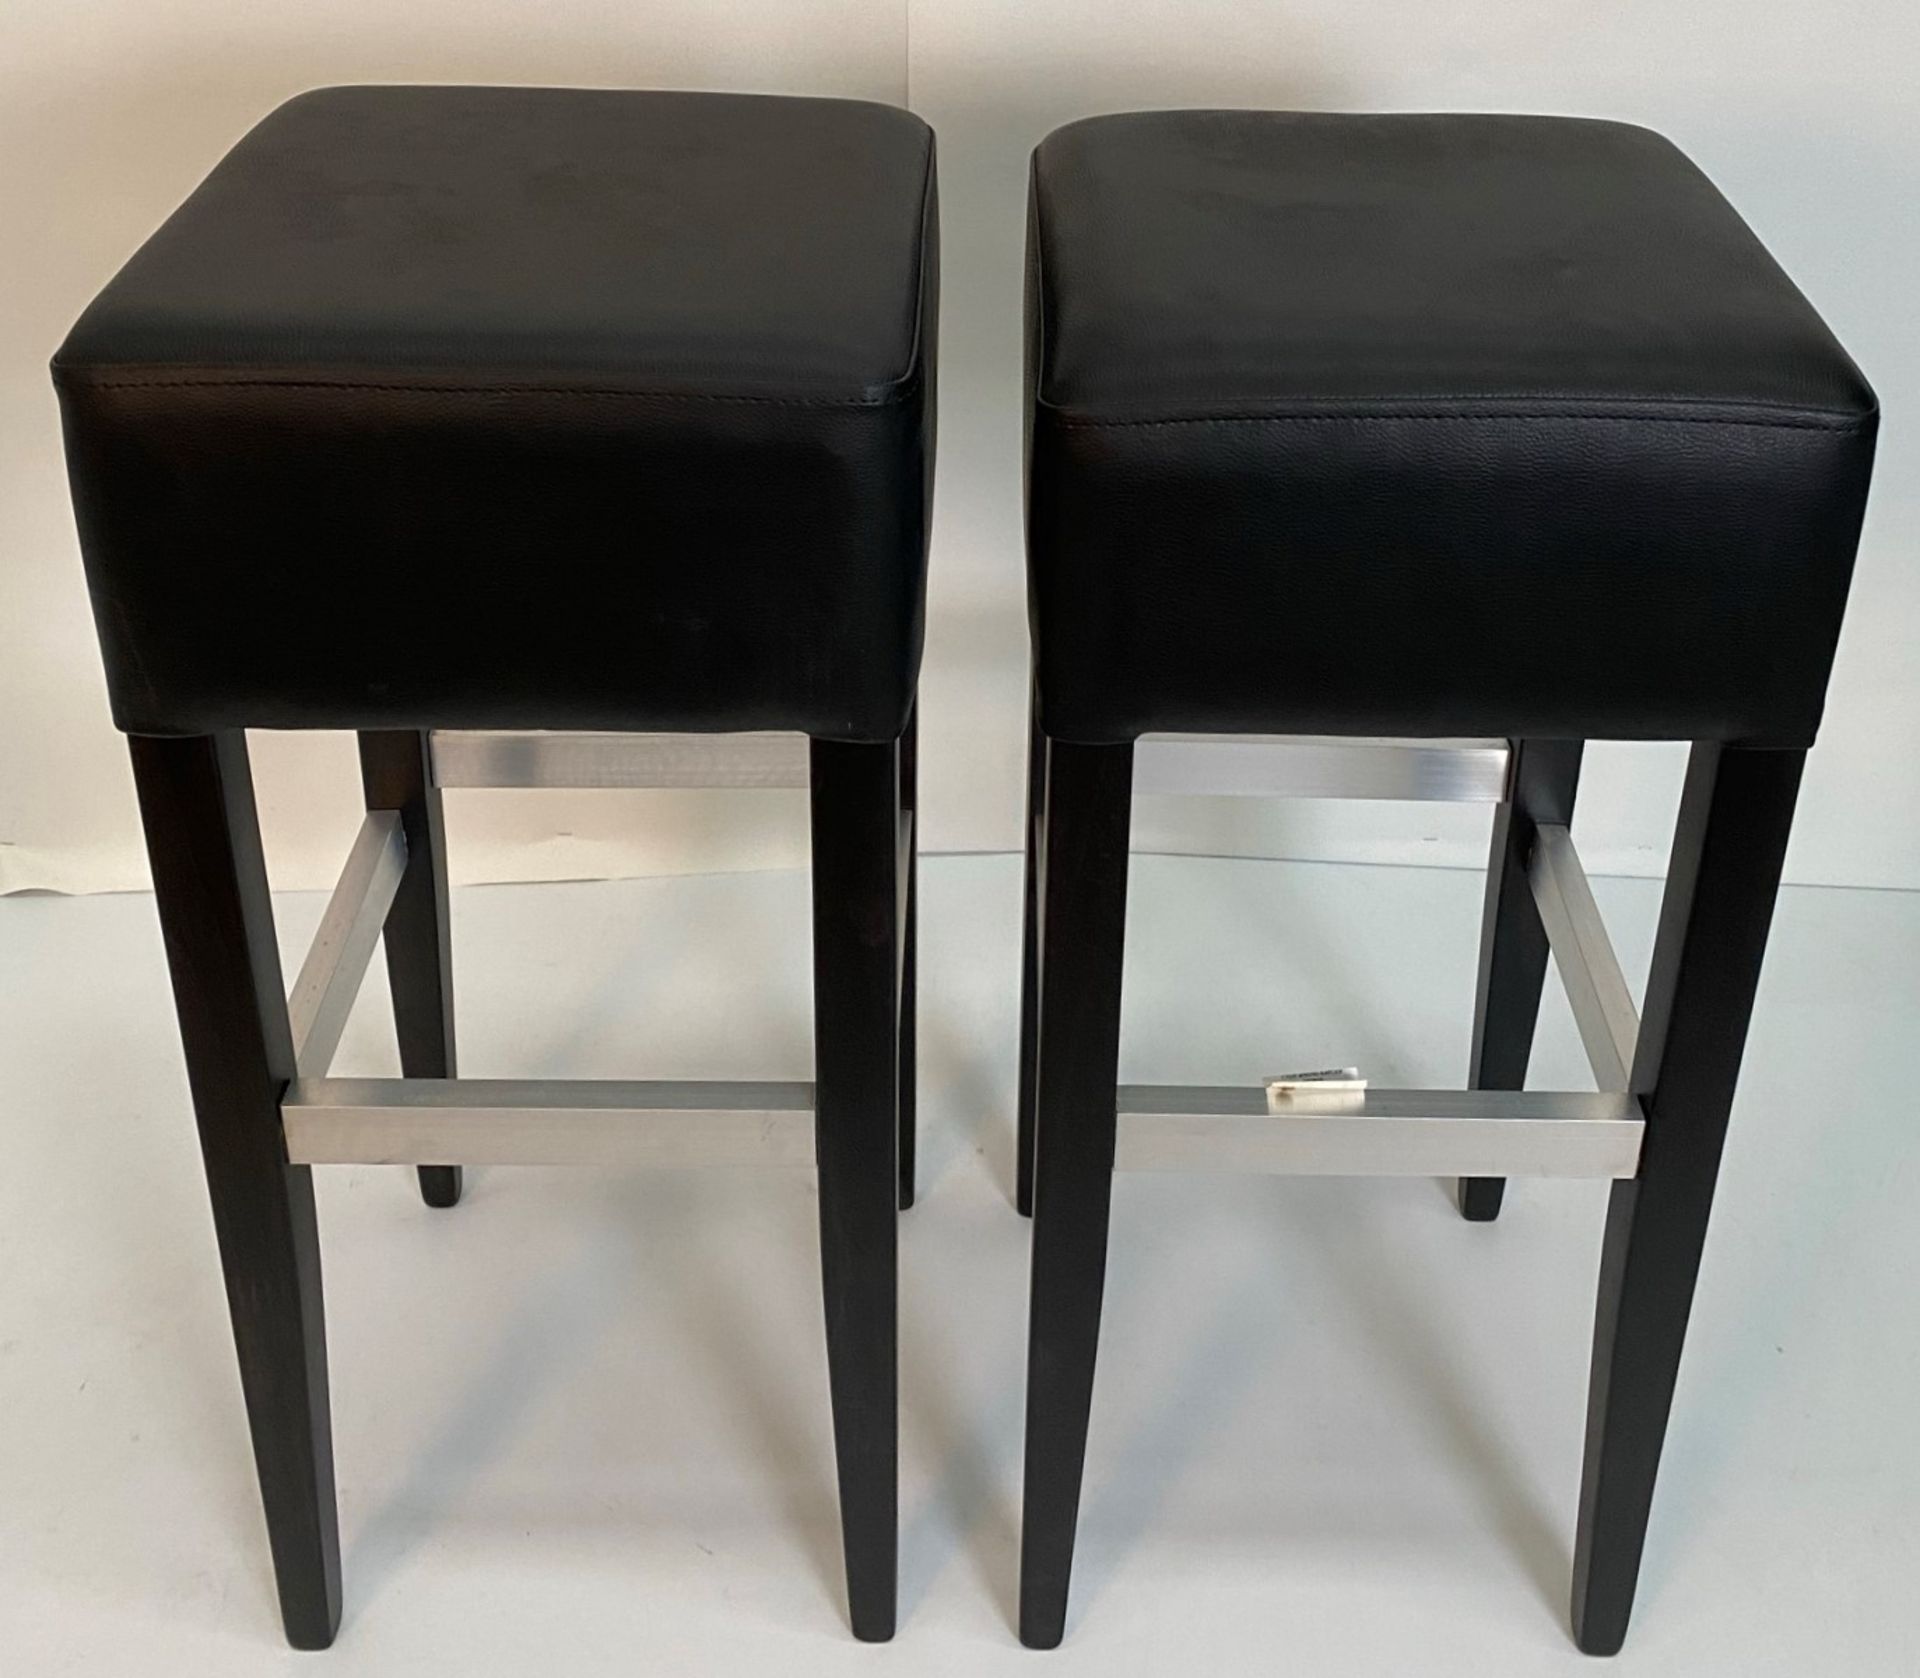 2 x Apollo Vena Black barstools with black wooden frame and metal footrest